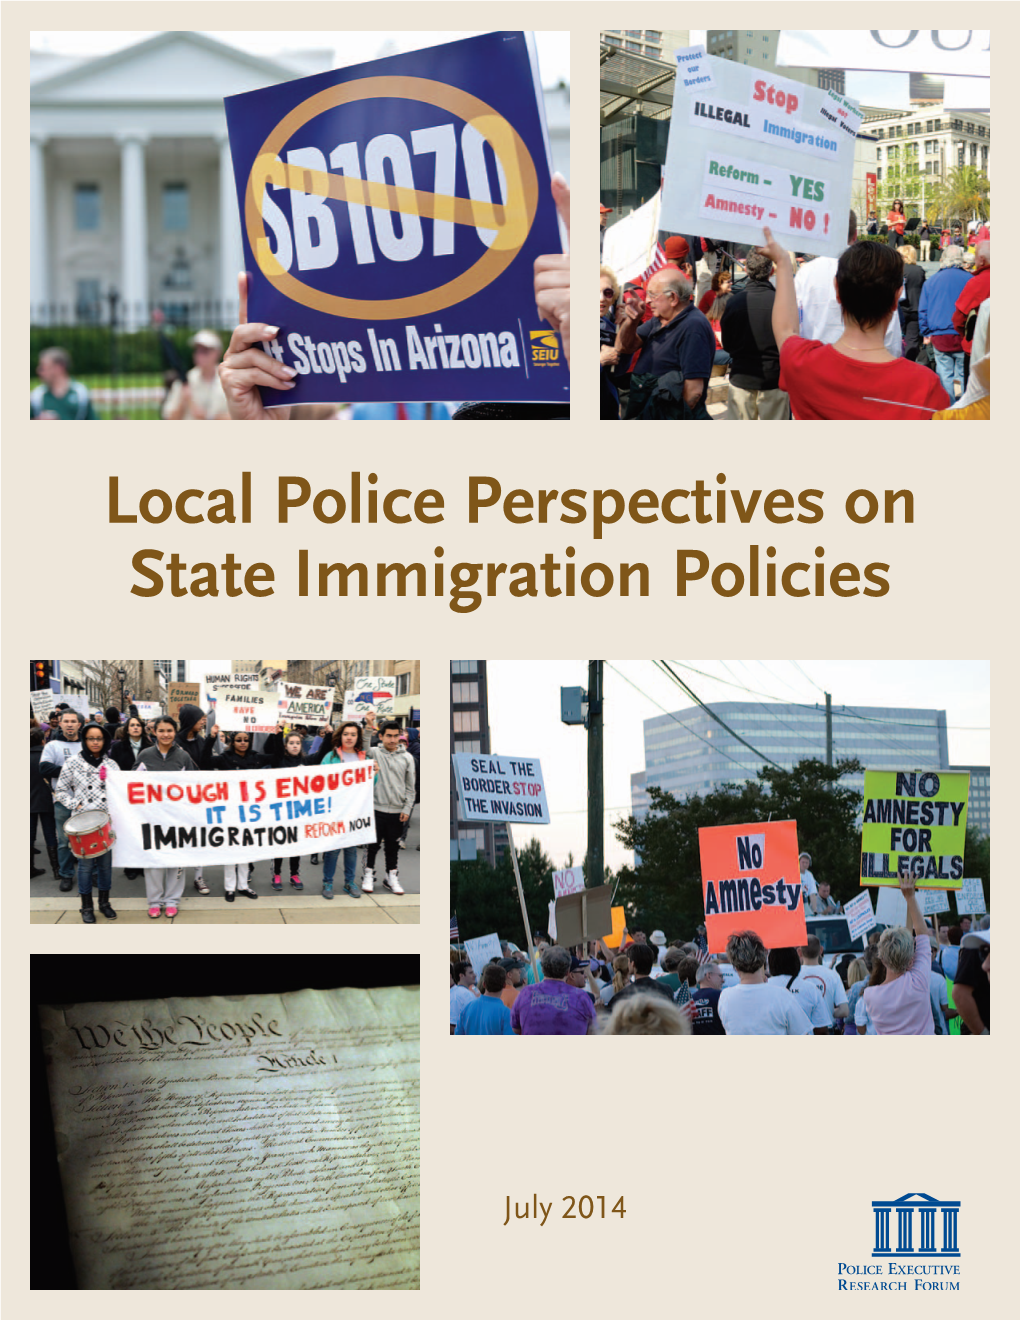 Local Police Perspectives on State Immigration Policies